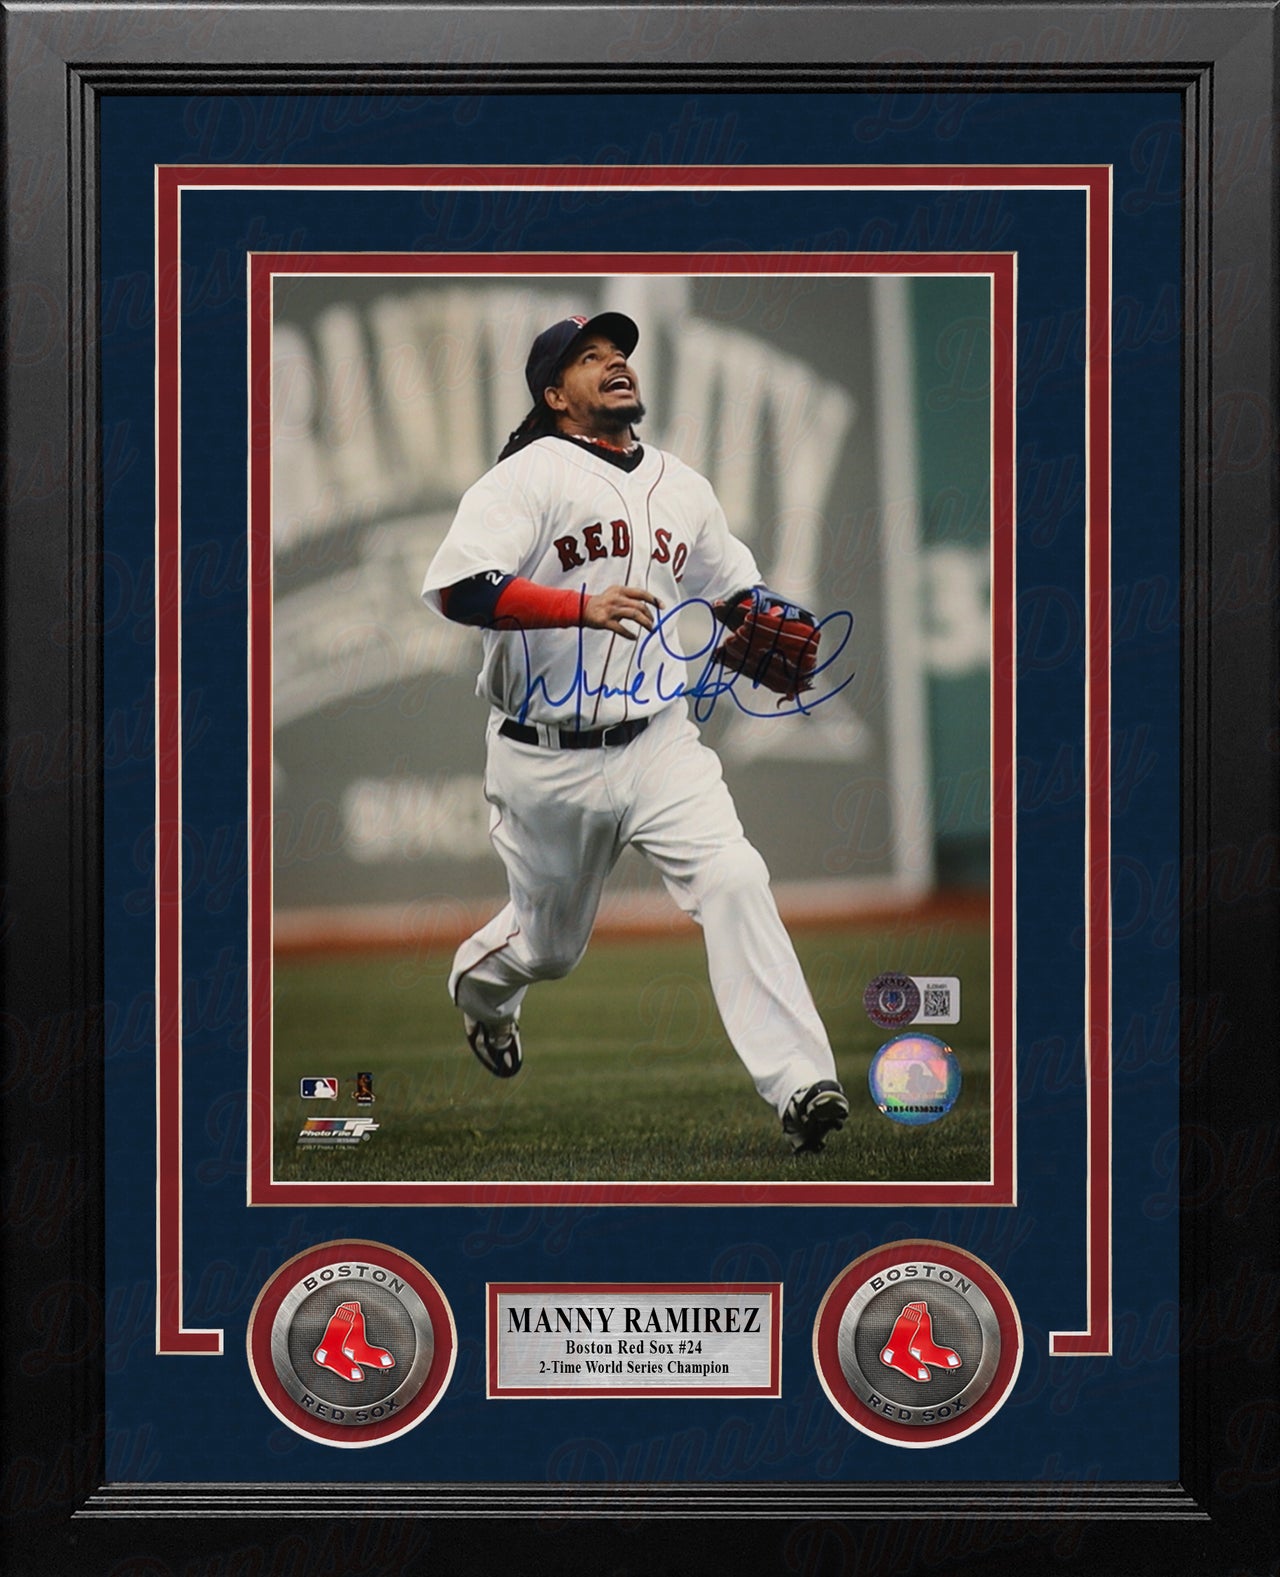 Manny Ramirez in Action Boston Red Sox Autographed 8" x 10" Framed Baseball Photo